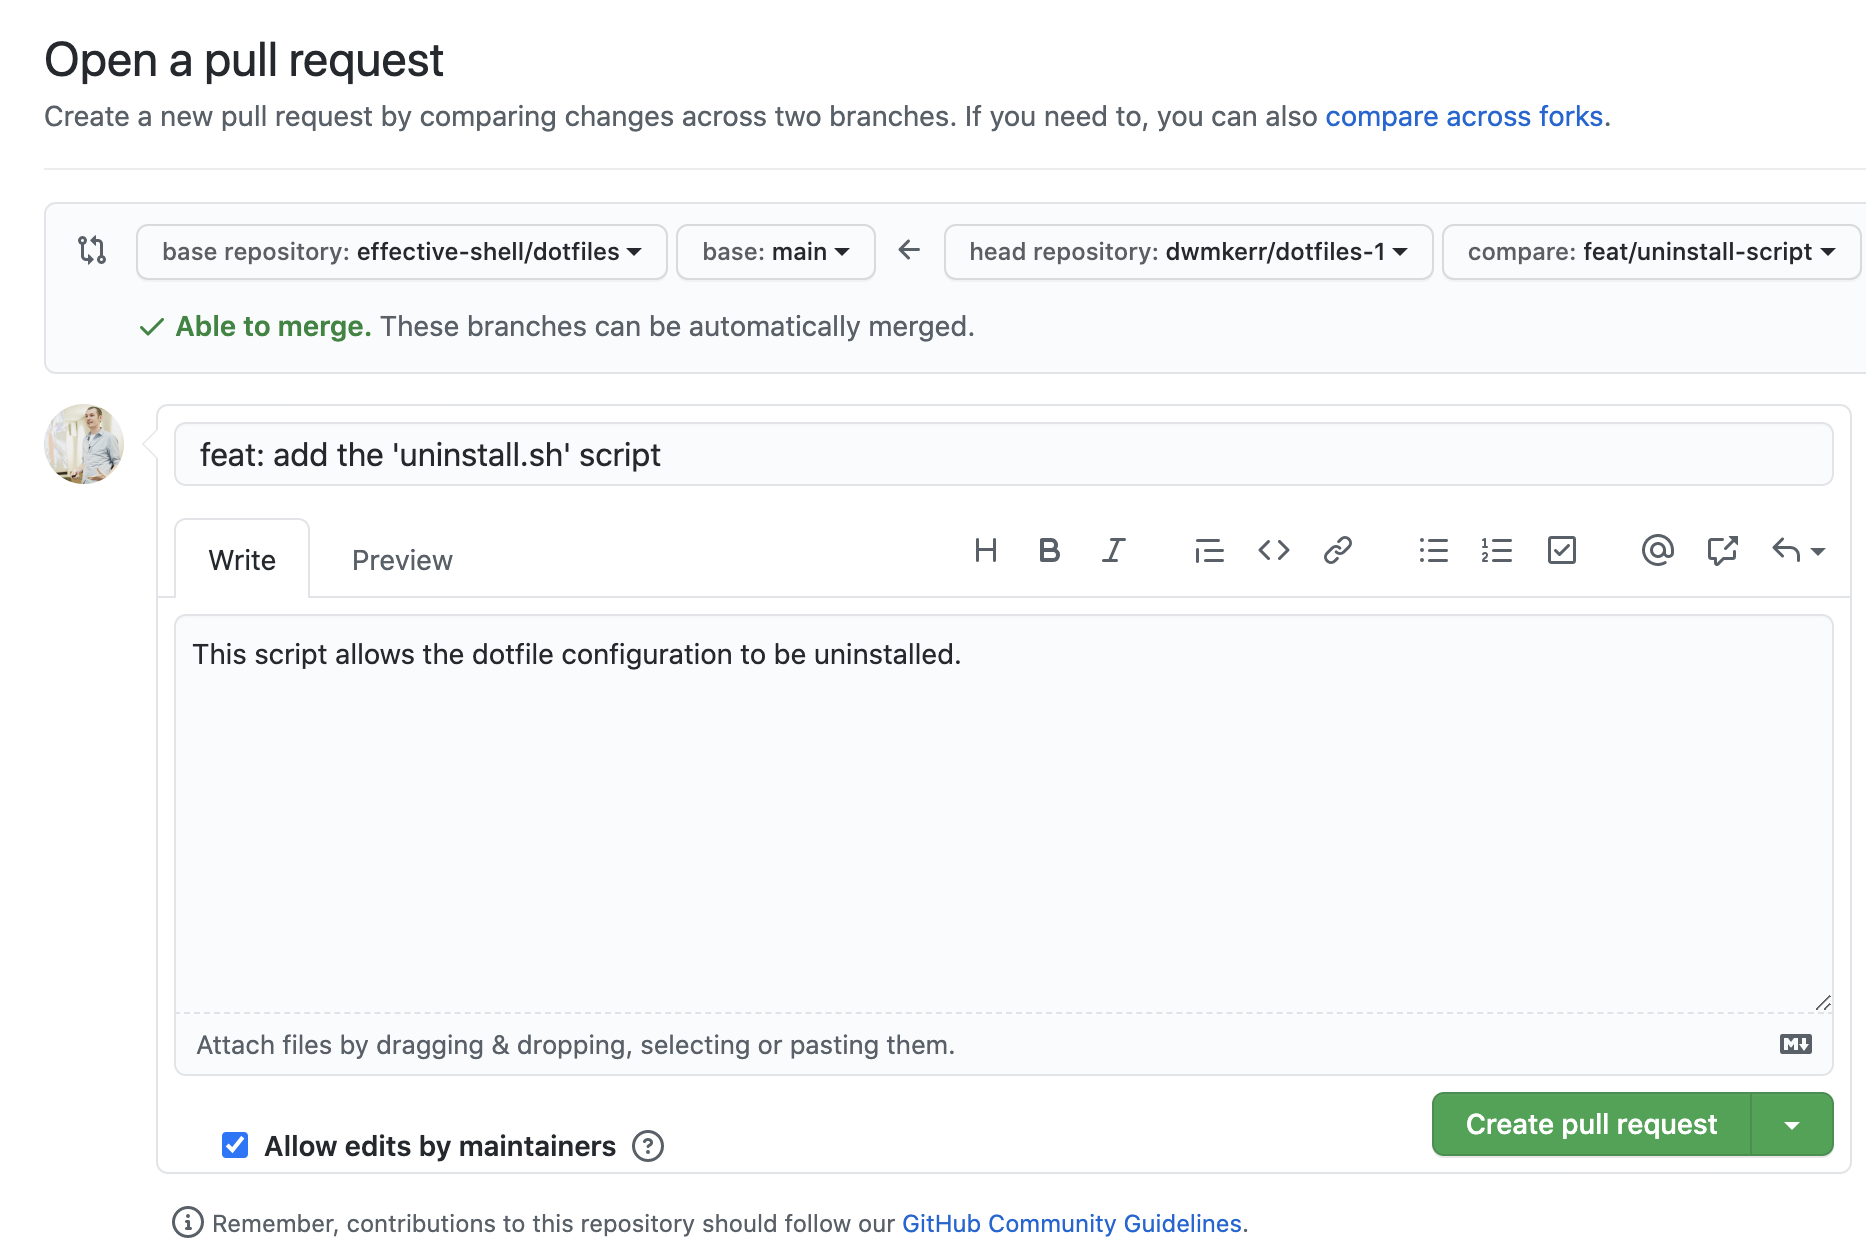 Screenshot of a pull request being opened